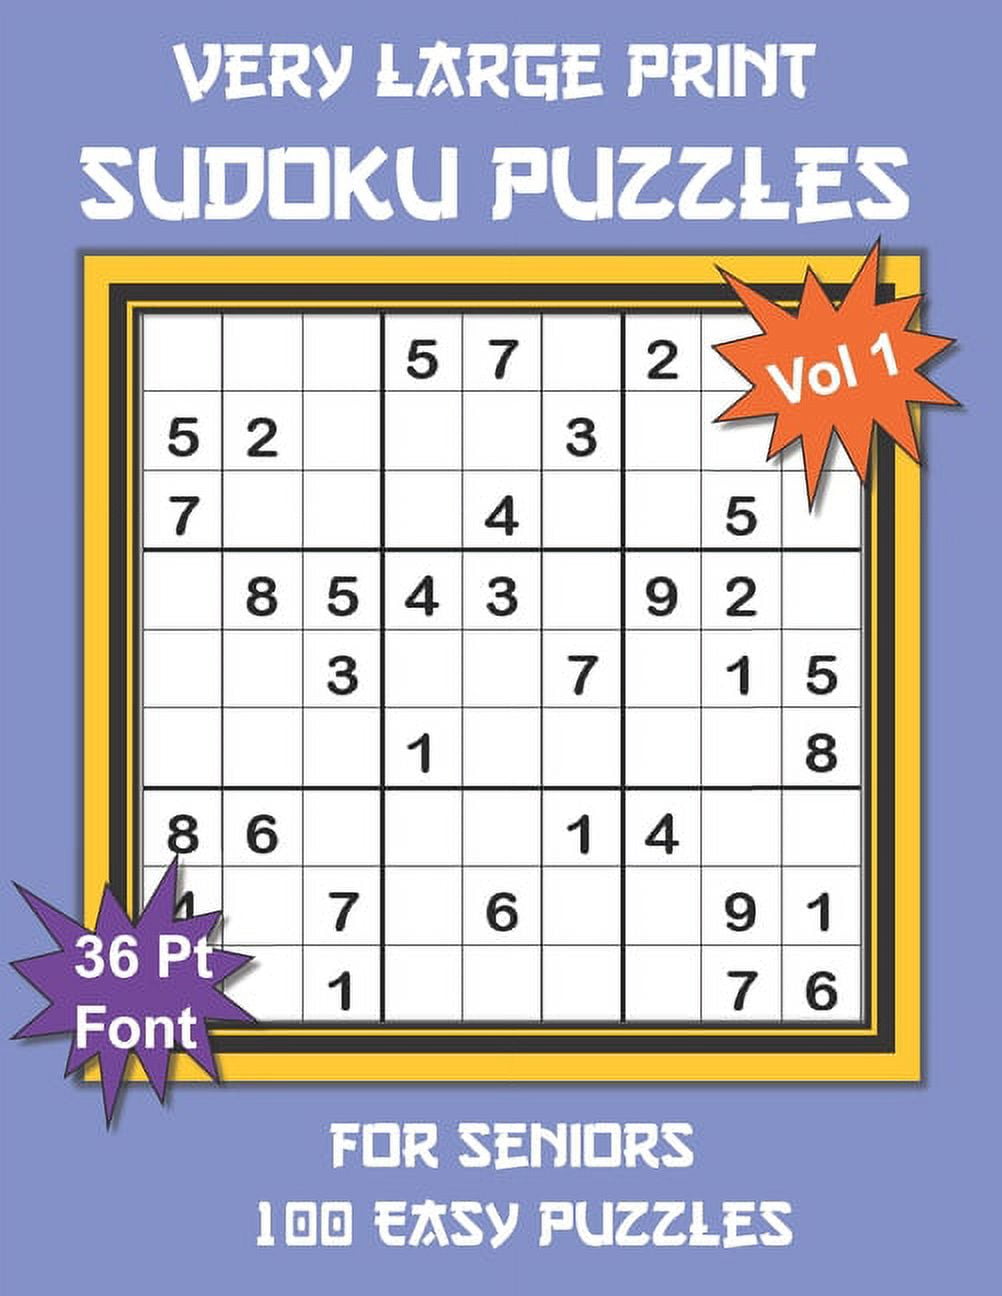 Sudoku Large Print for Adults - Hard Level - N°31: 100 Hard Sudoku Puzzles  - Puzzle Big Size (8.3x8.3) and Large Print (36 points) (Large Print /  Paperback)